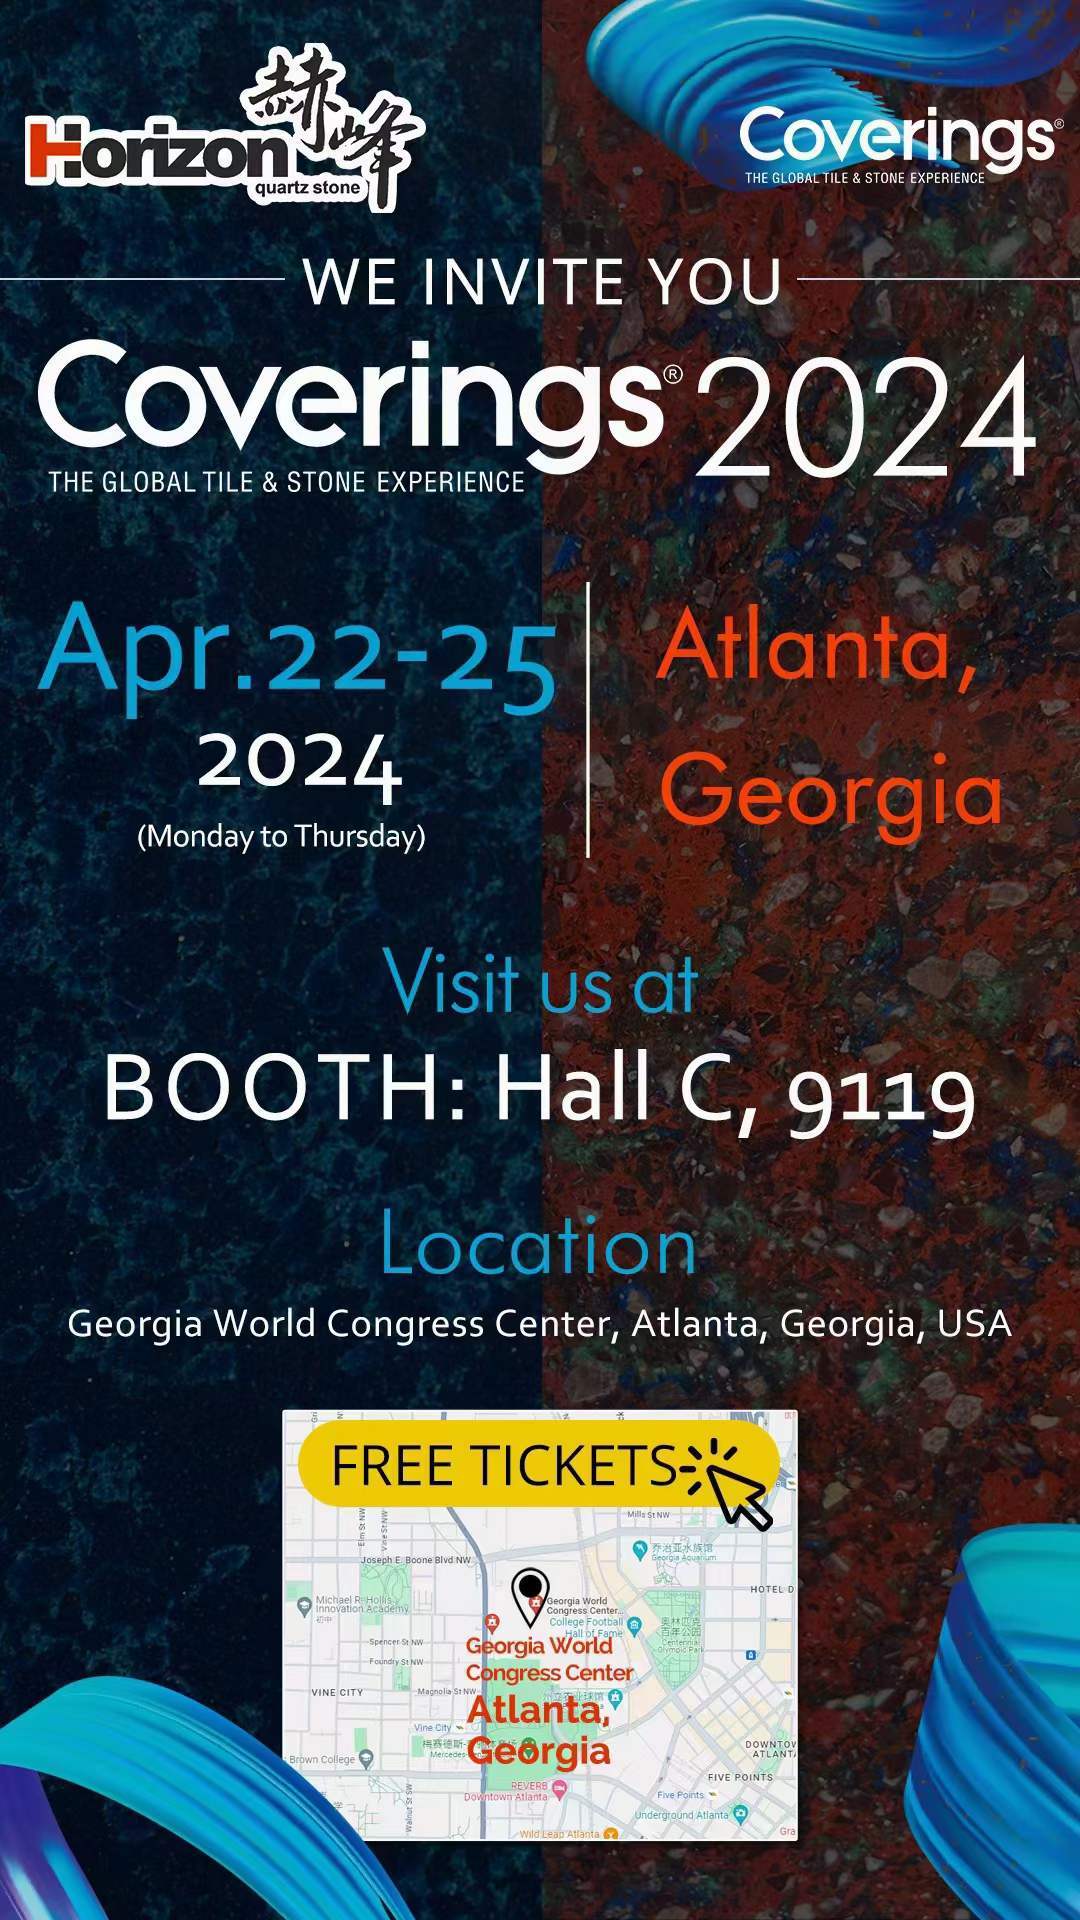 Coverings 2024 THE GLOBAL TILE & STONE EXPERIENCE